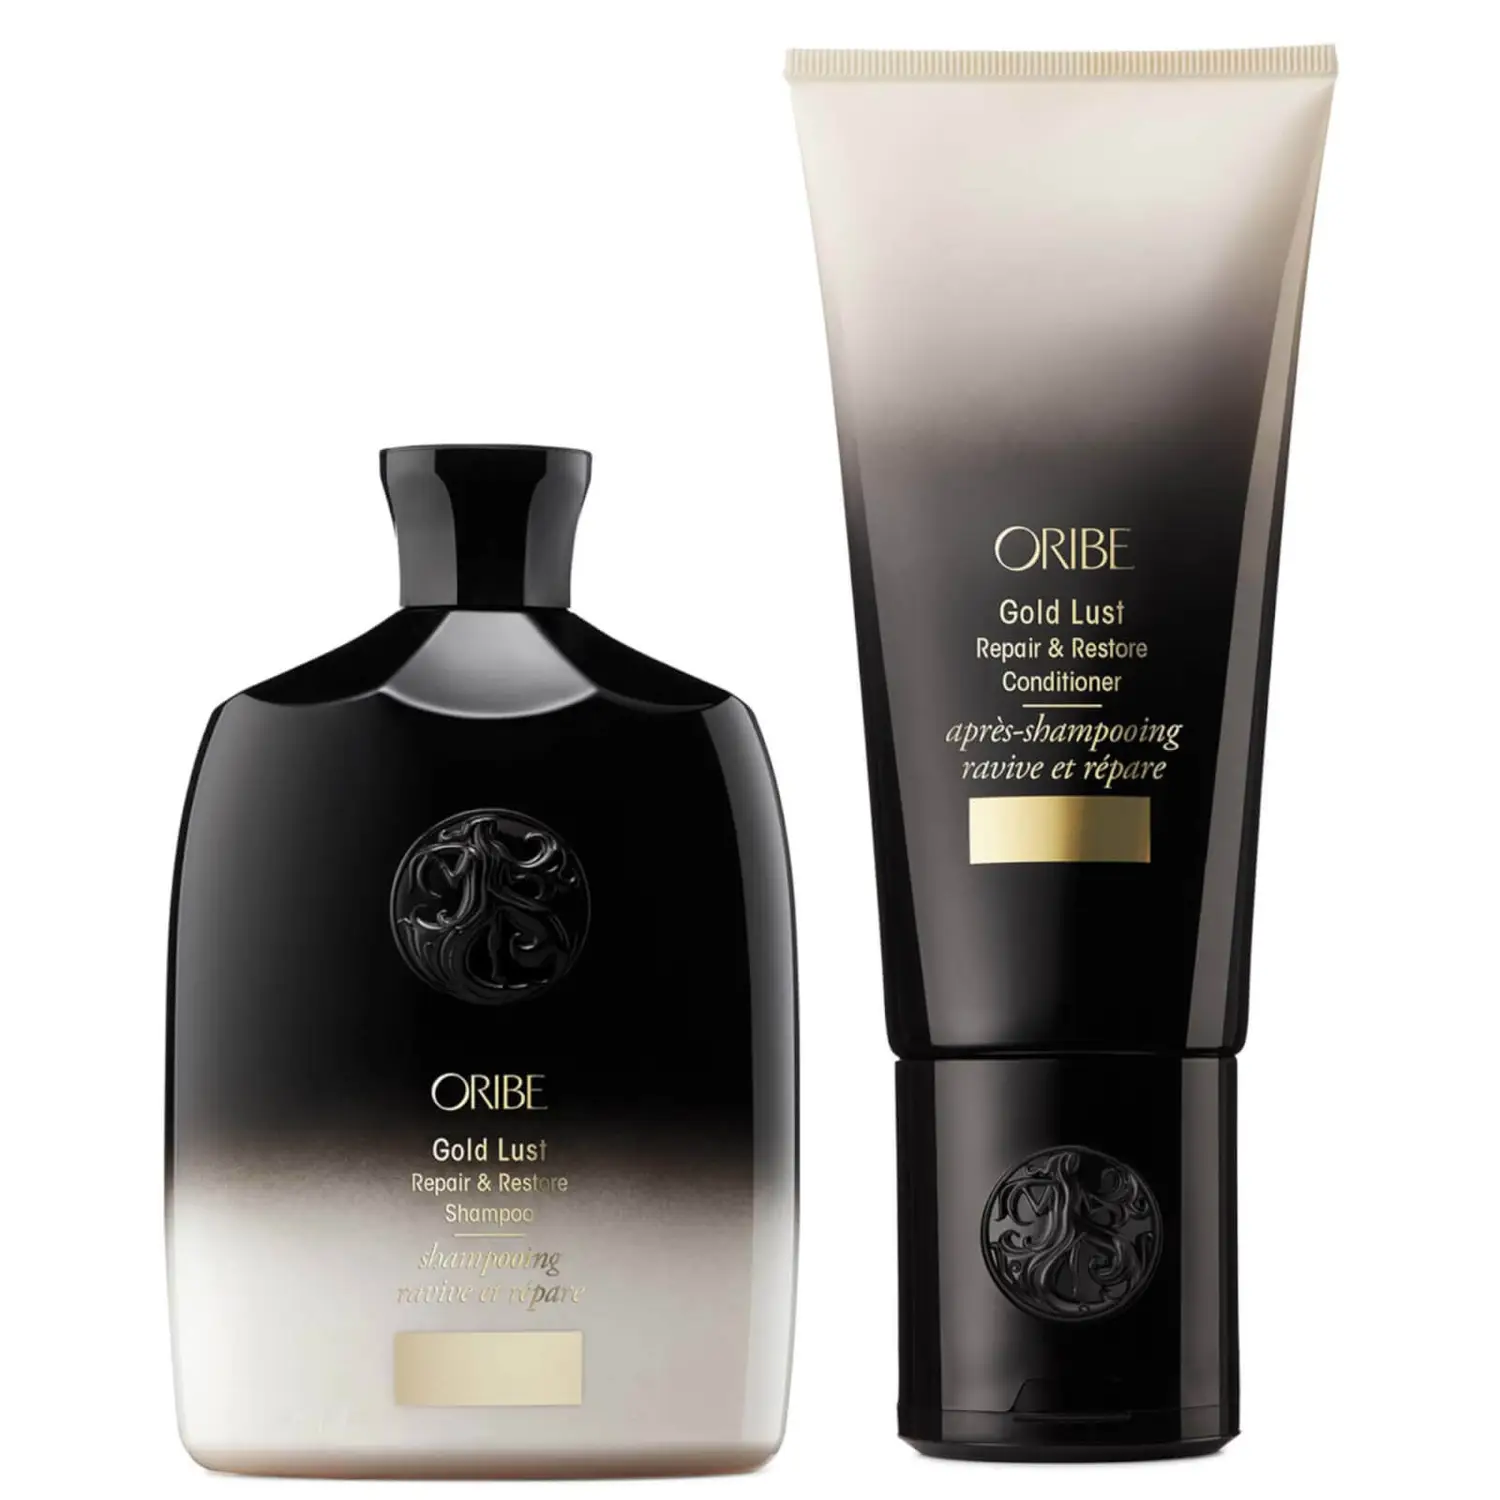 Oribe Gold Lust Shampoo and Conditioner